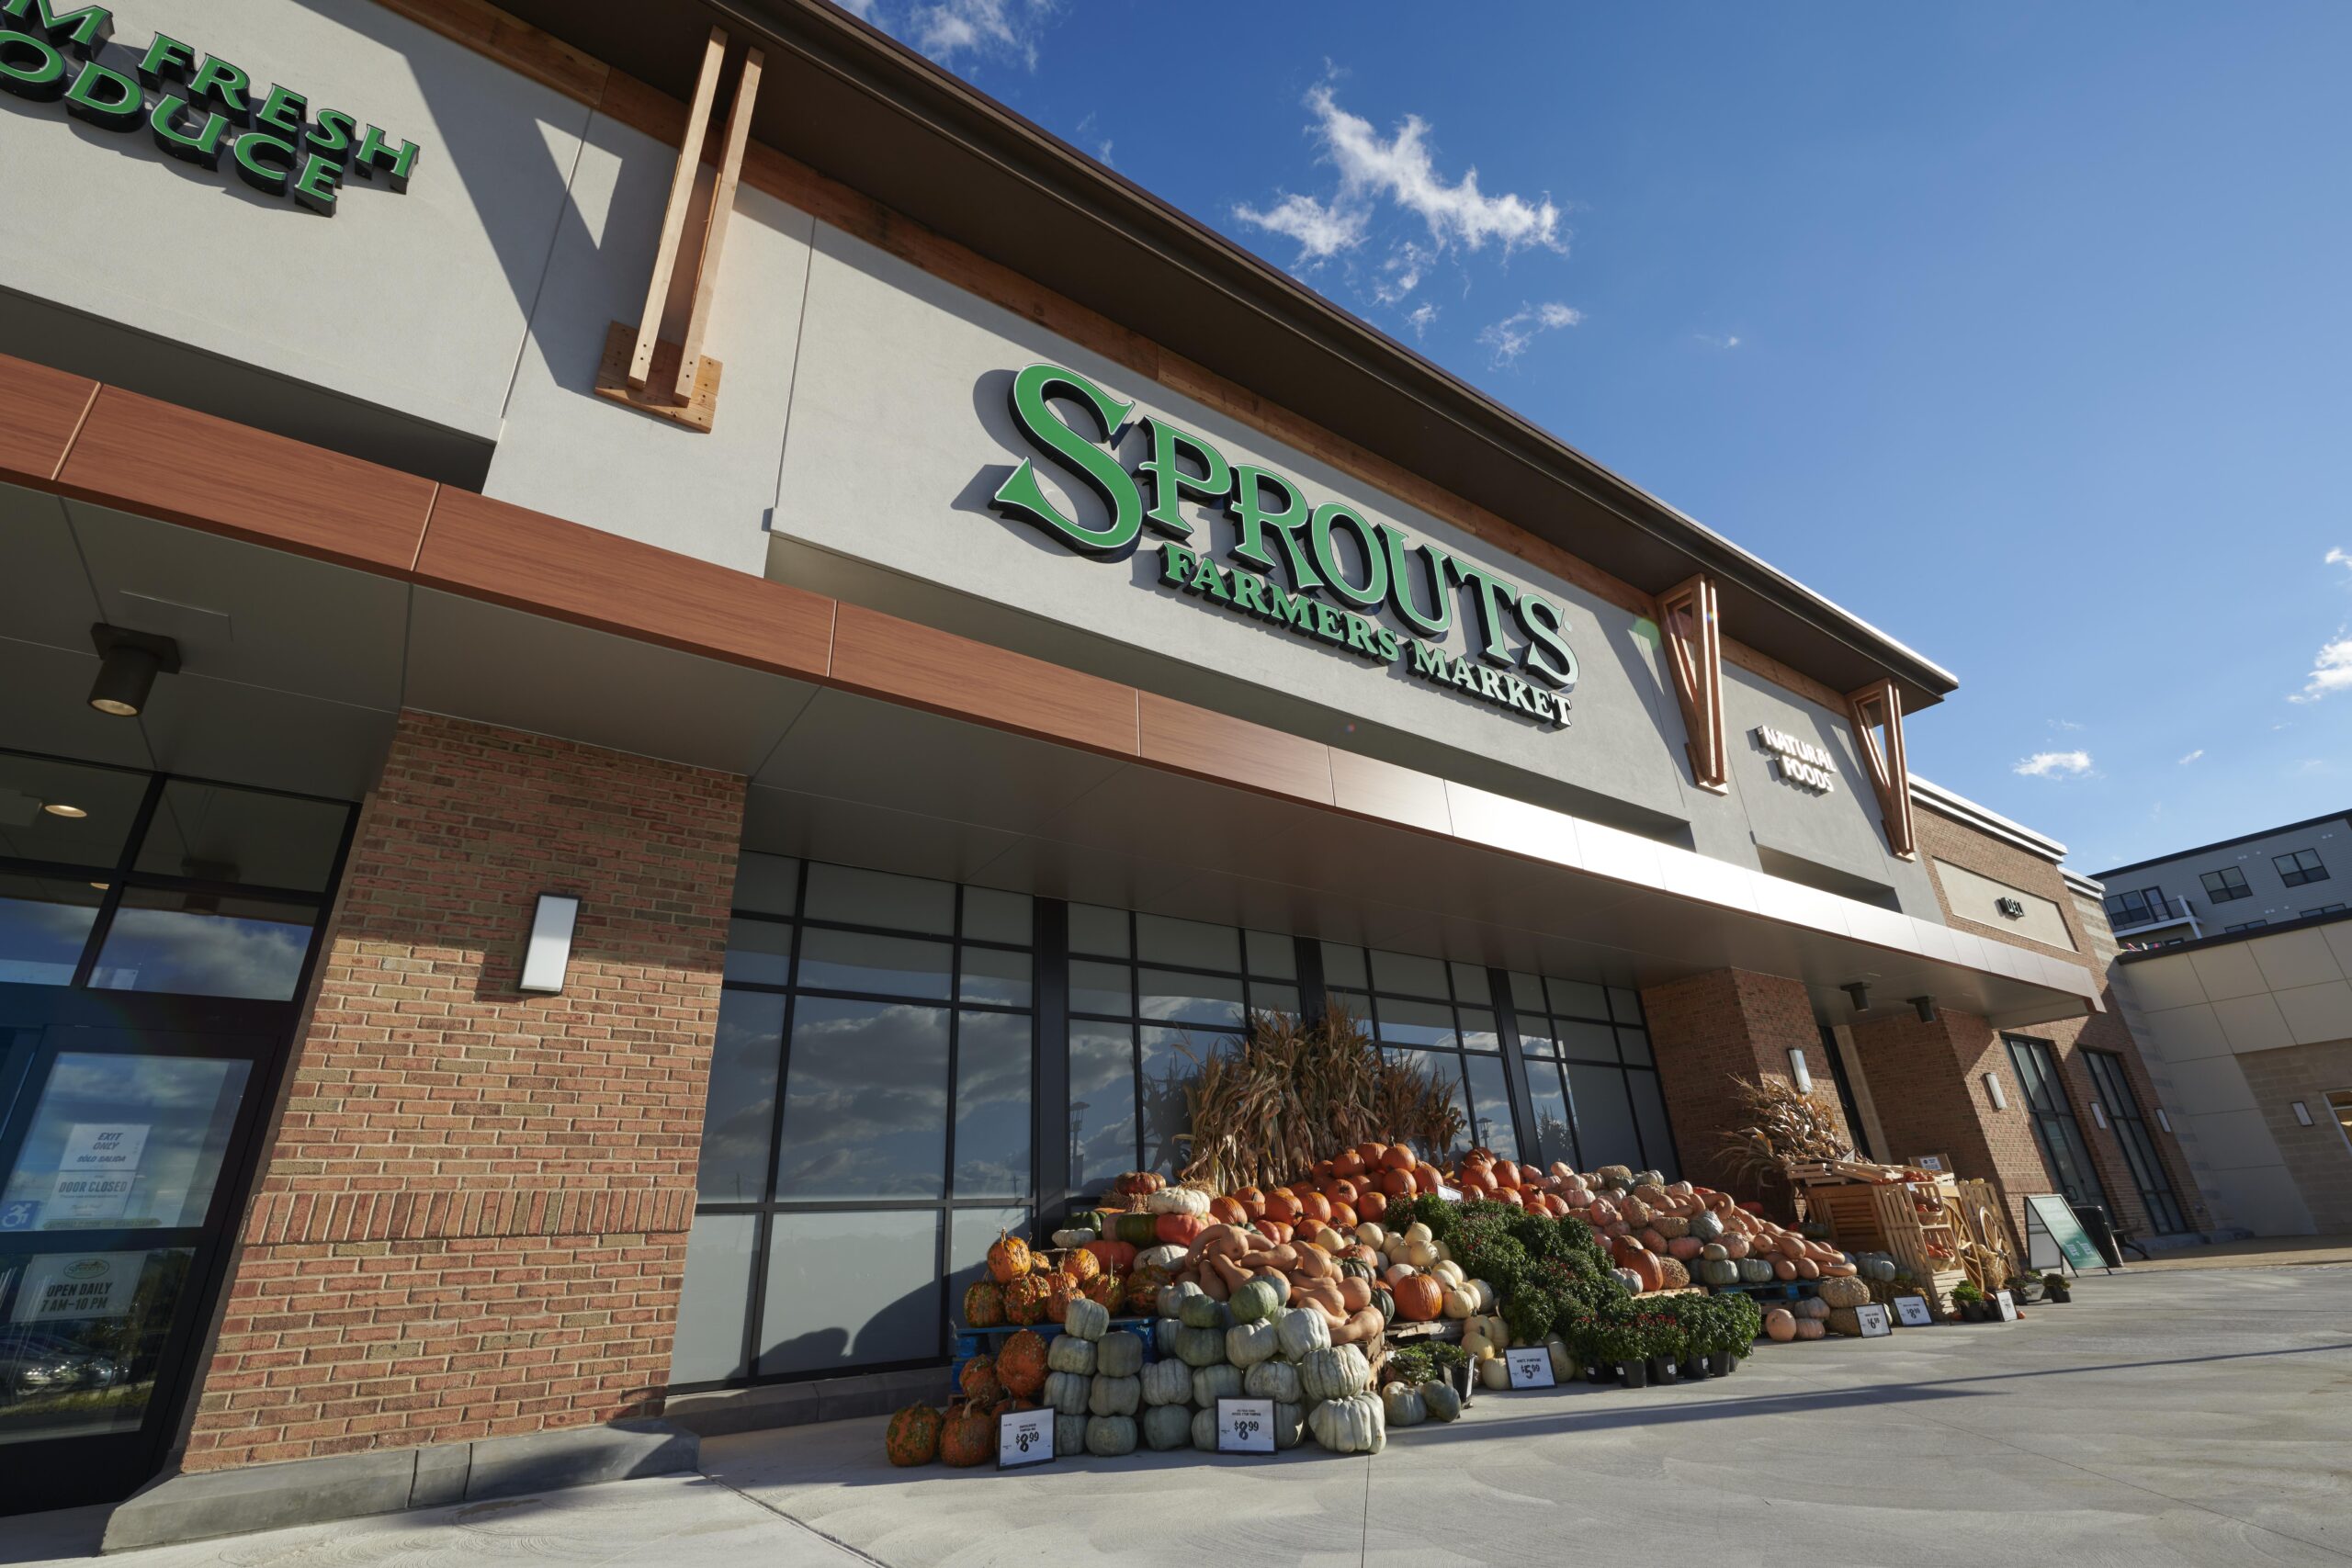 Sprouts Farmers Market storefront